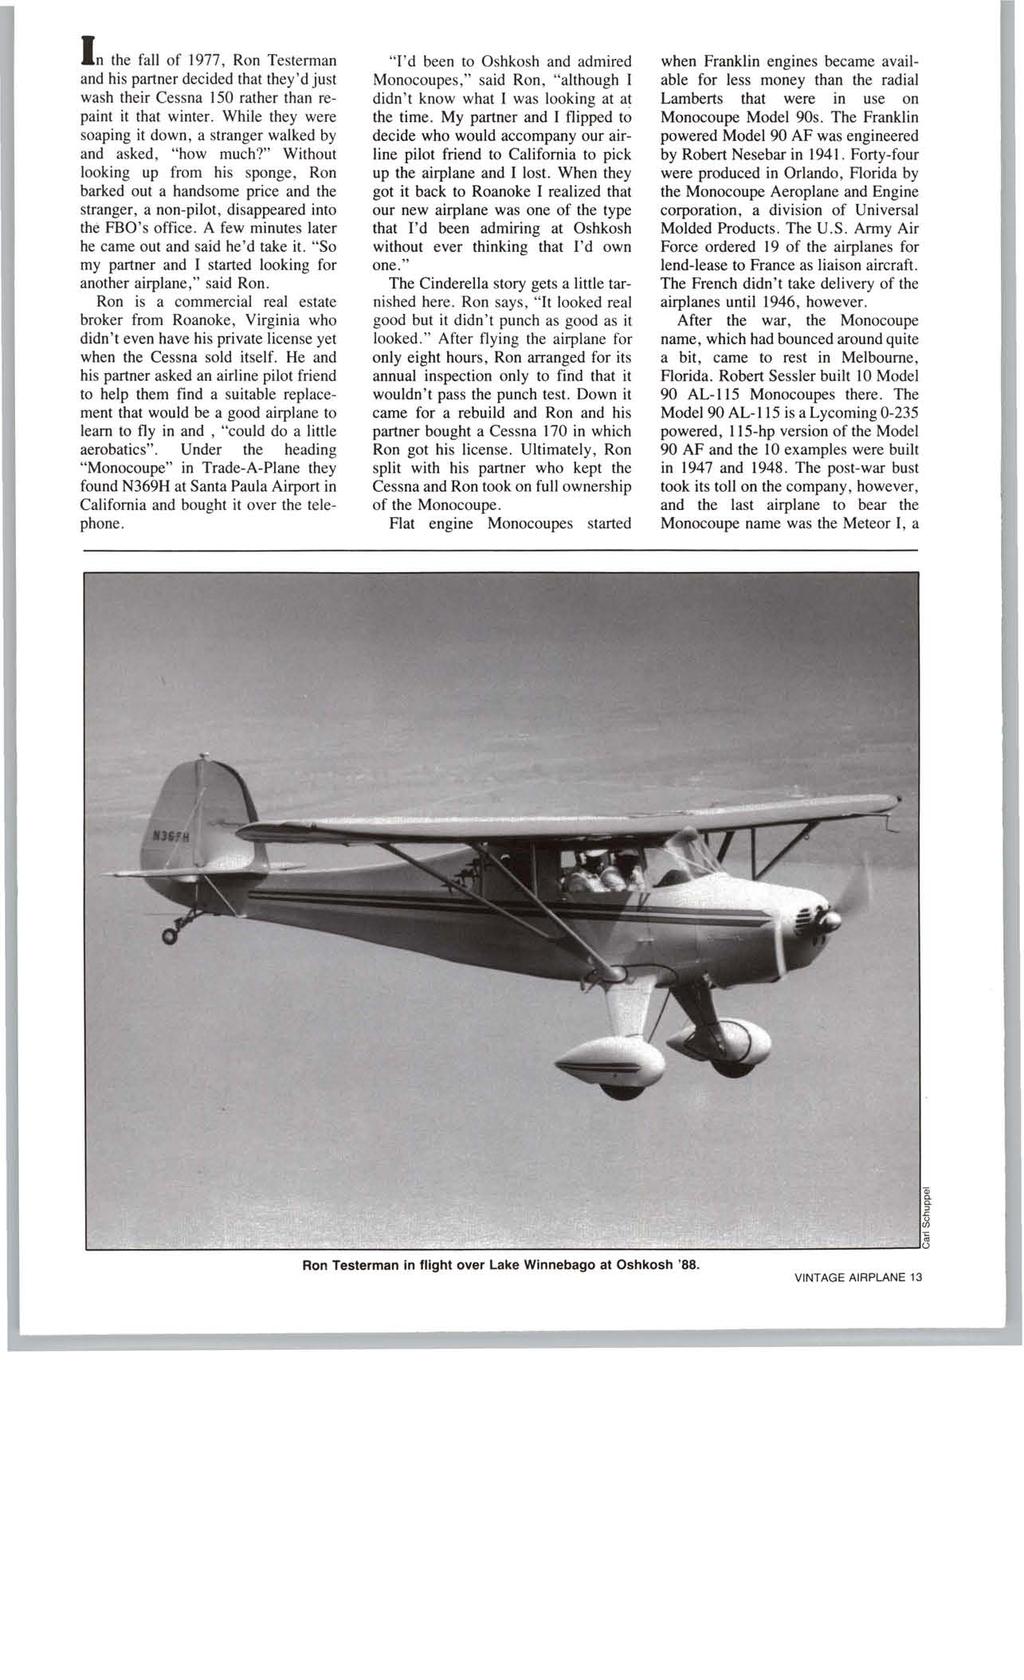 In the fall of 1977, Ron Testerman and his partner decided that they'd just wash their Cessna 150 rather than repaint it that winter.